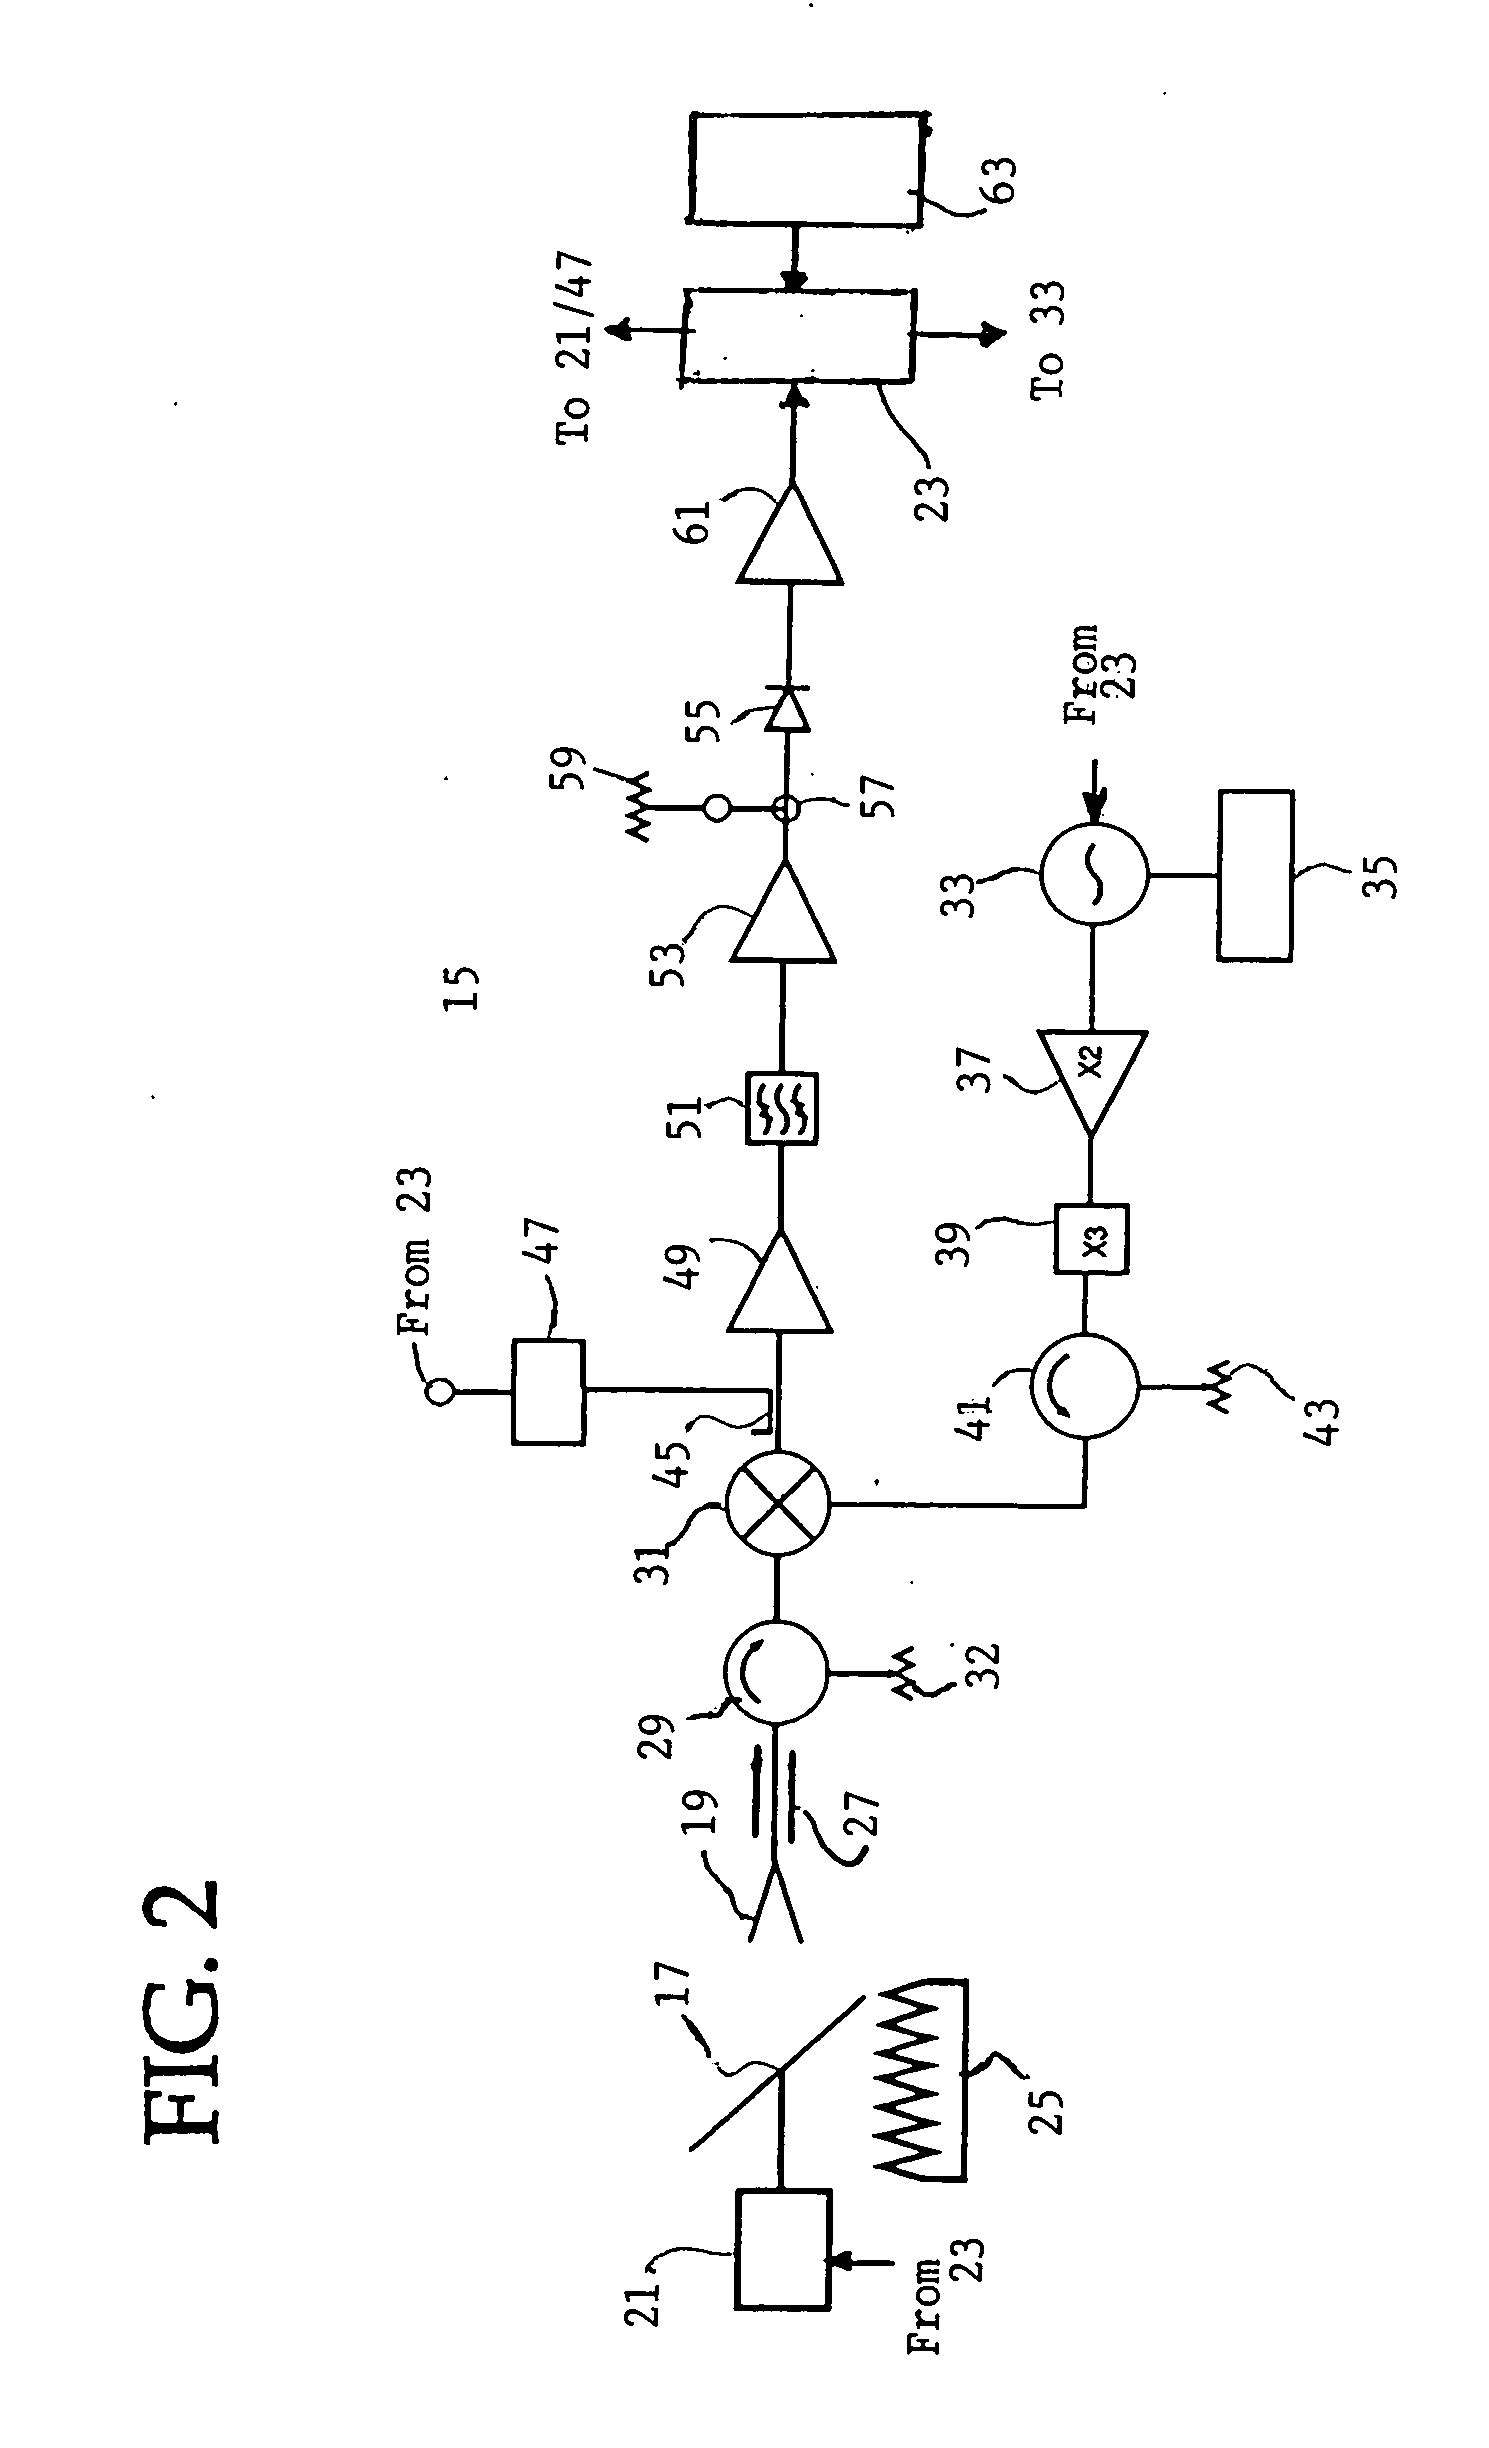 Methods and apparatus for passive tropospheric measurments utilizing a single band of frequencies adjacent to a selected millimeter wave water vapor line